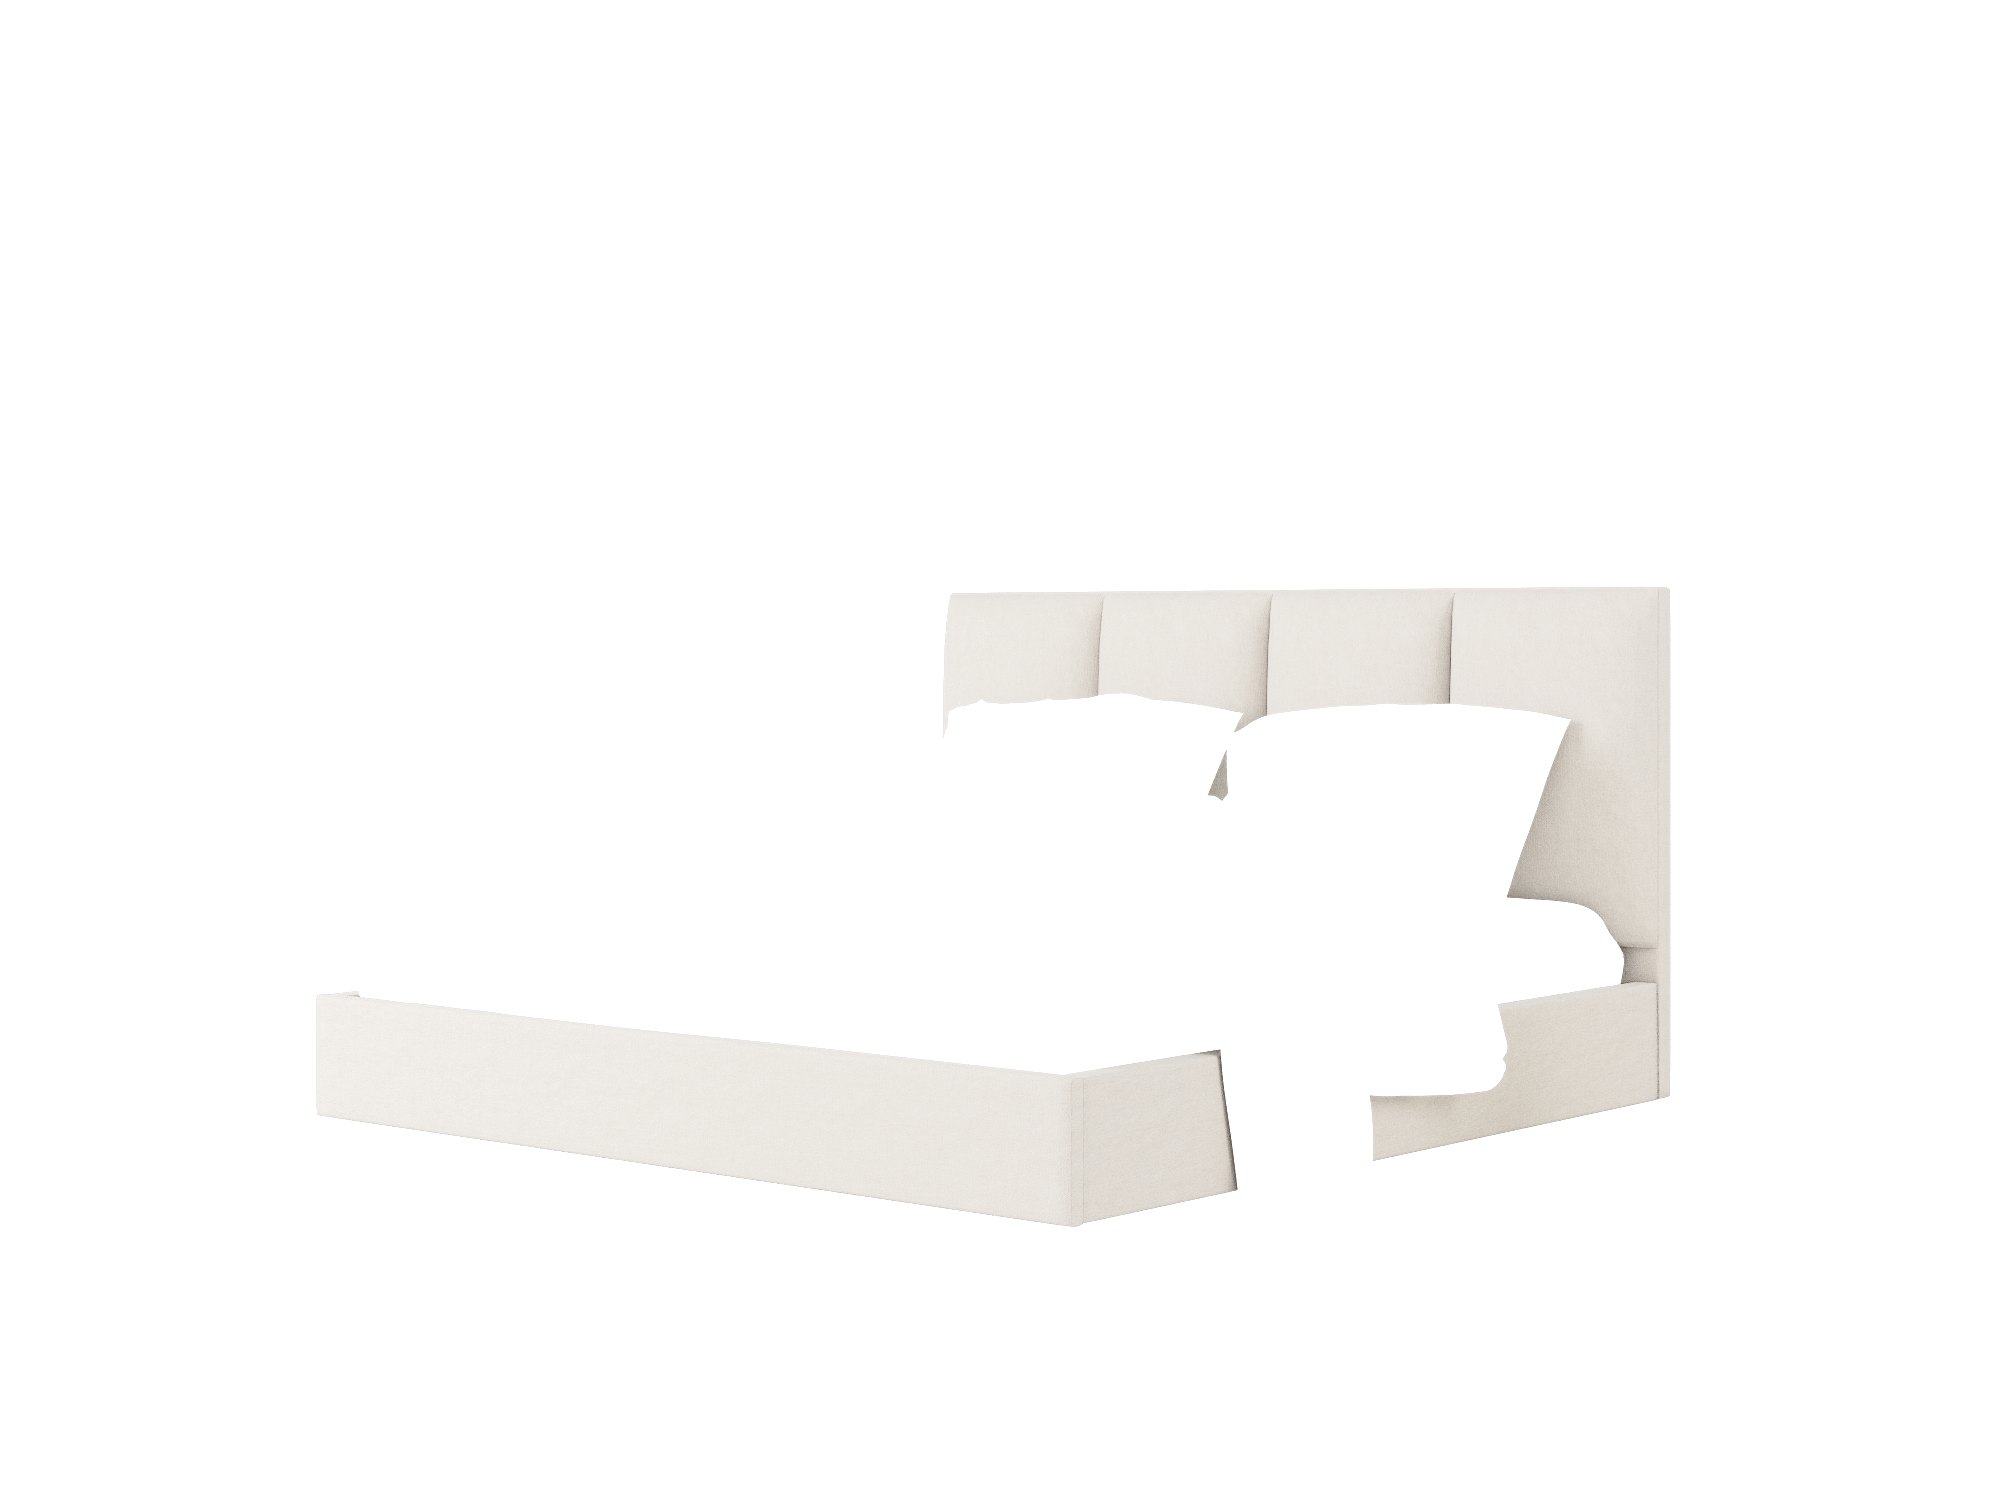 Celine Suave Dove Bed King Room Texture